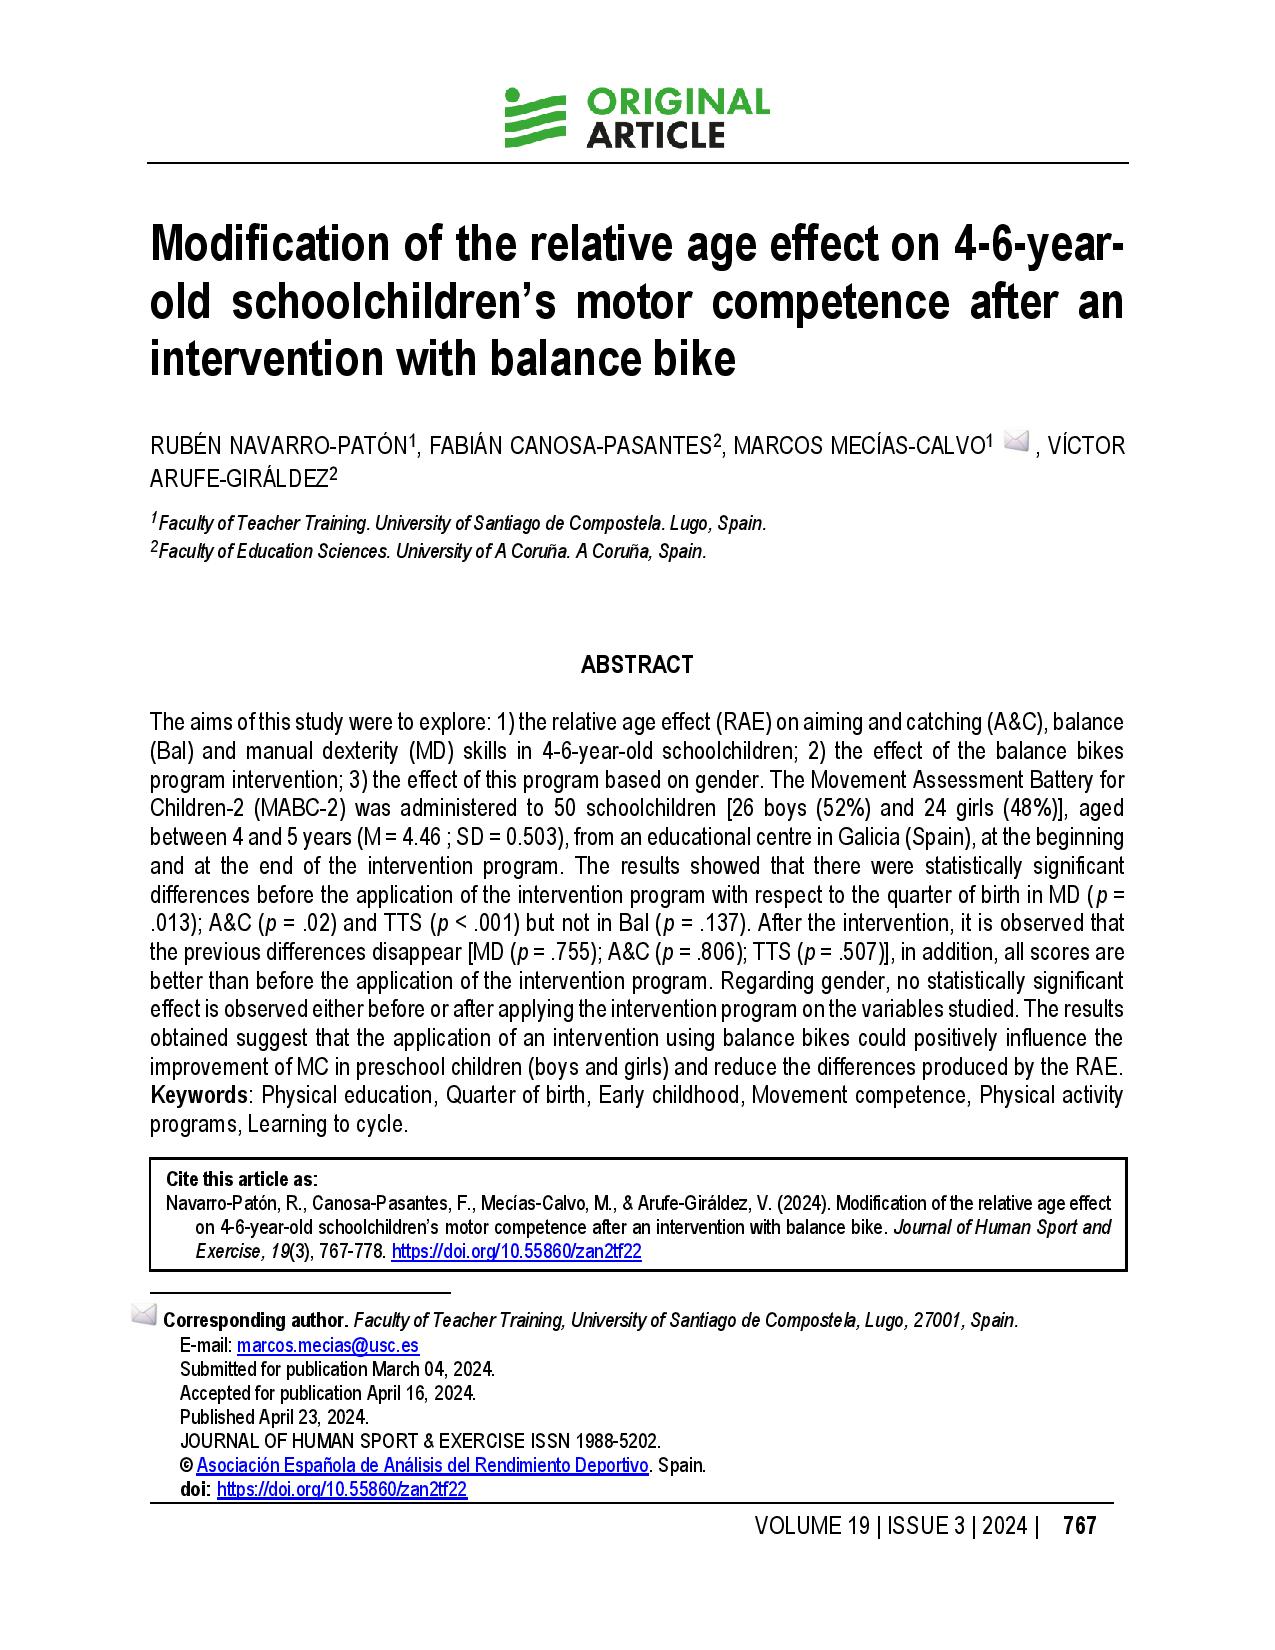 Modification of the relative age effect on 4-6-year-old schoolchildren’s motor competence after an intervention with balance bike